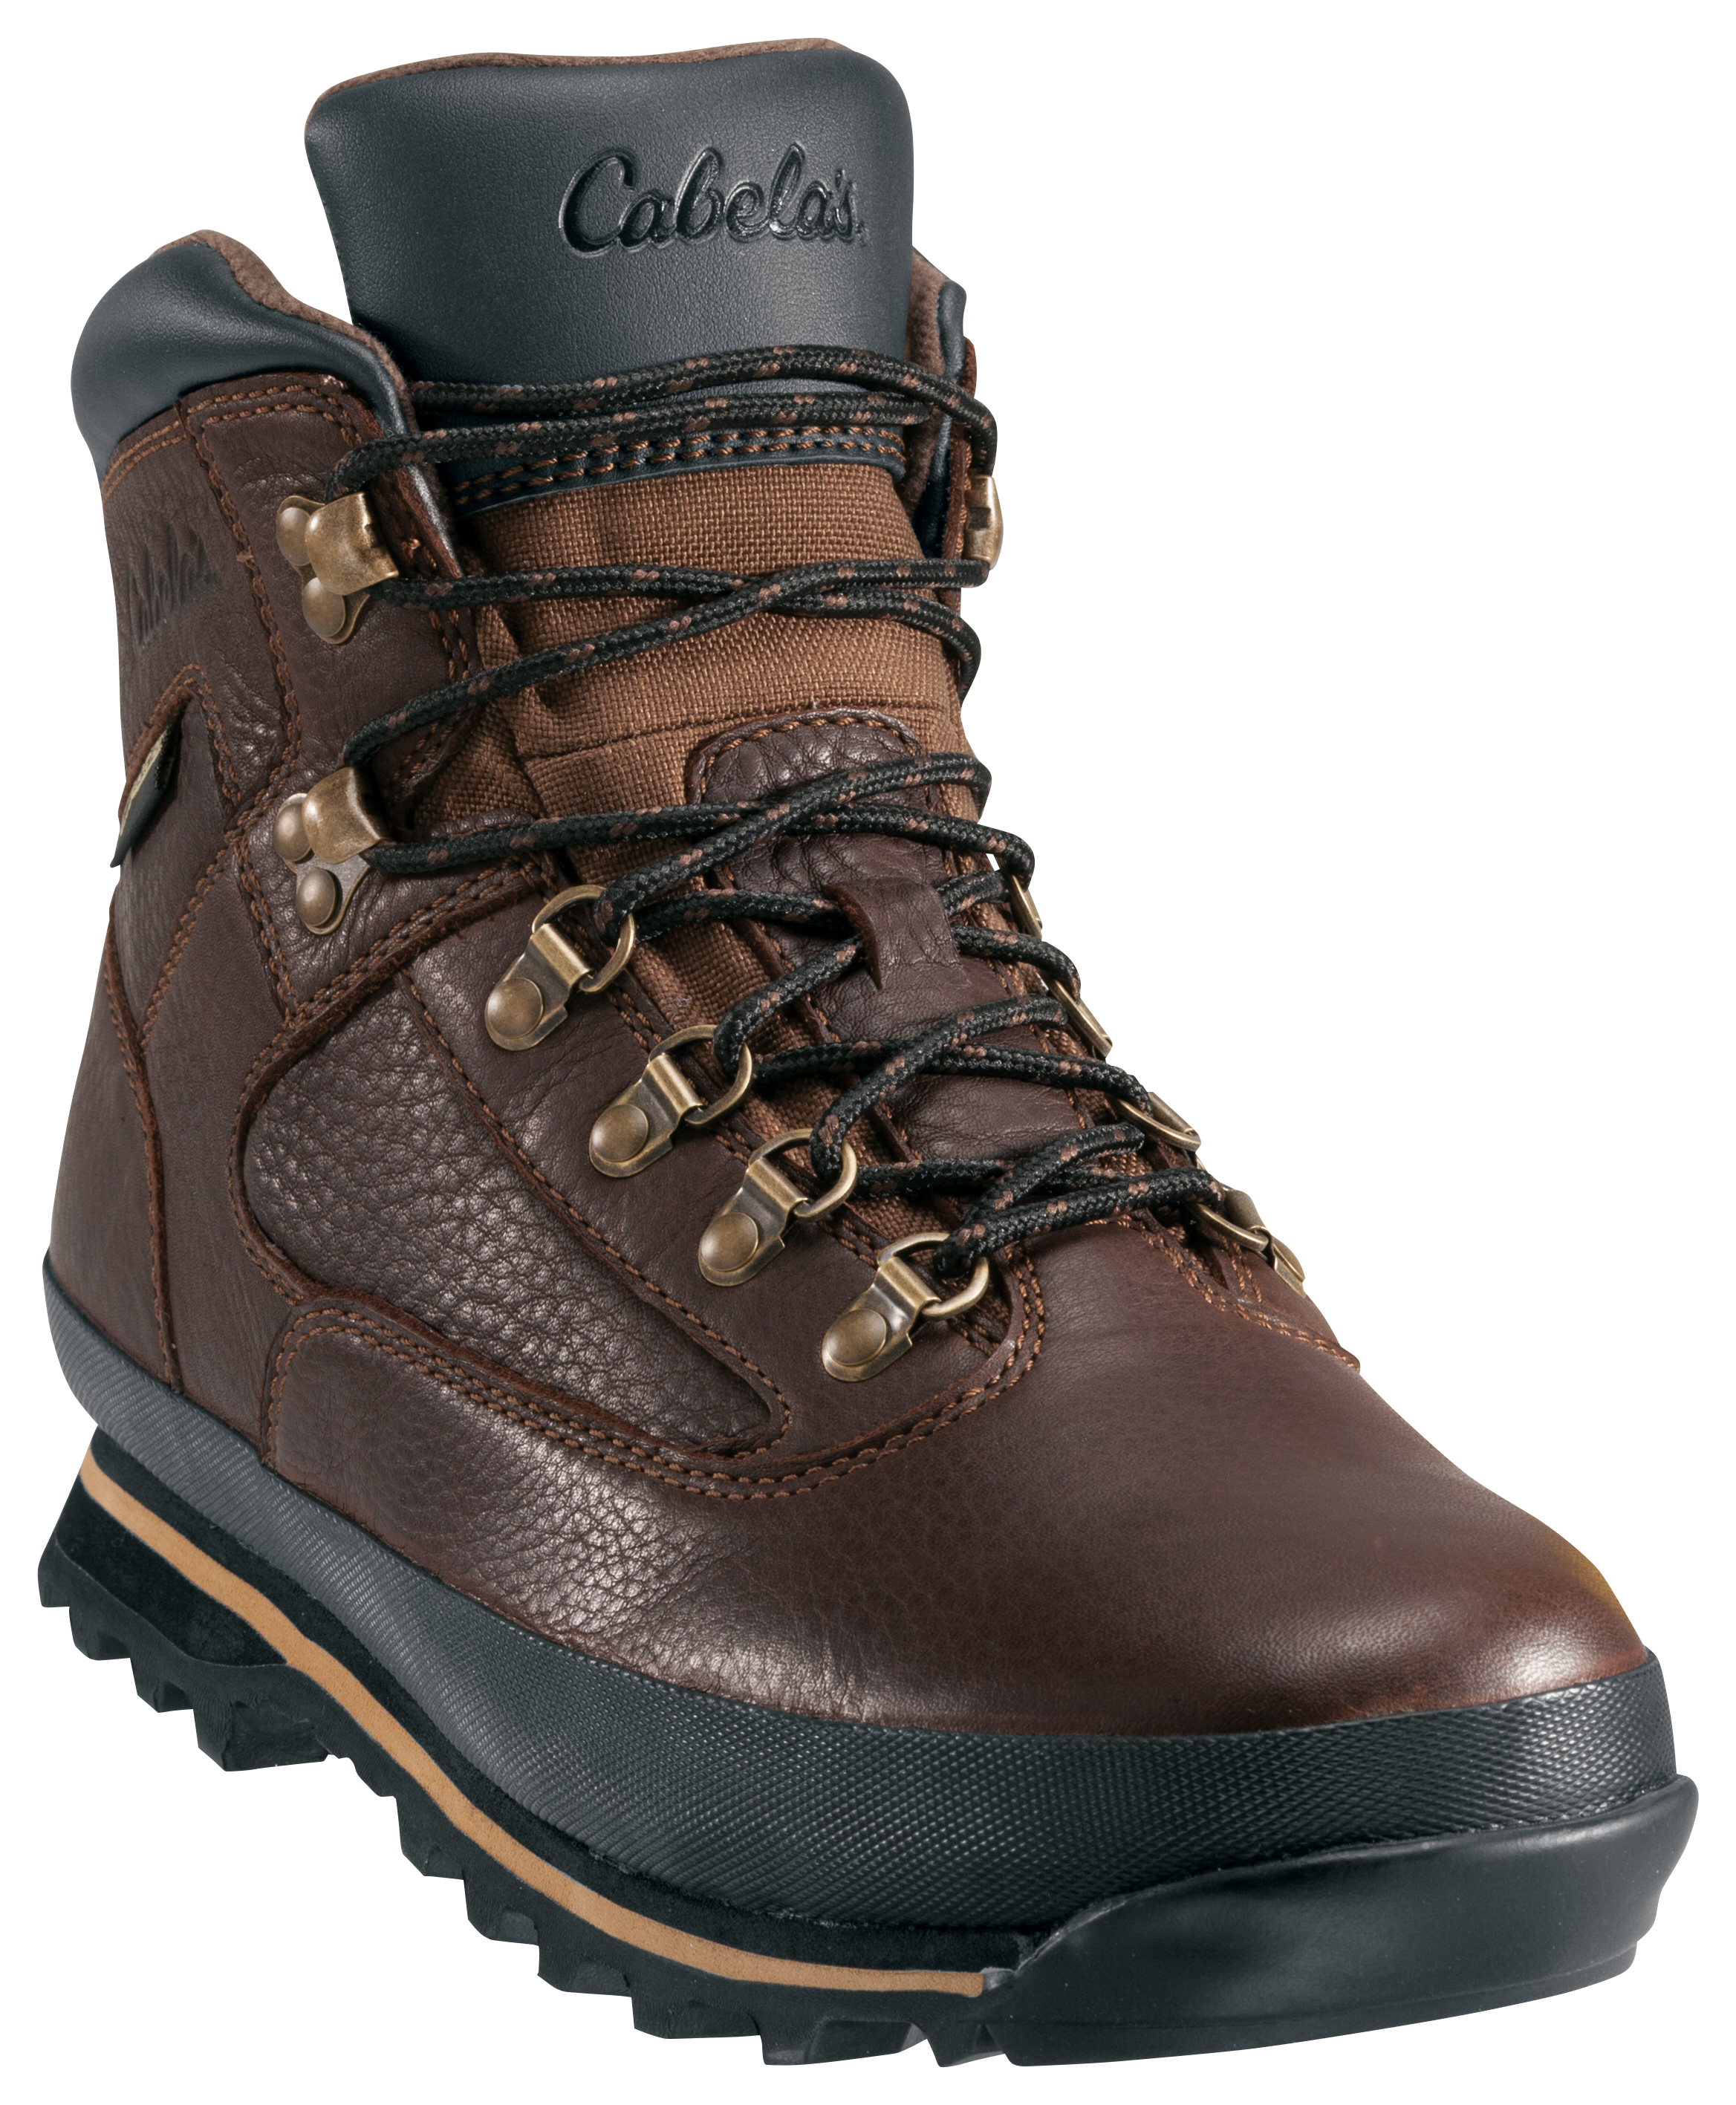 Cabela's Rimrock Mid GORE-TEX Hiking Boots for Men - Brown - 11W